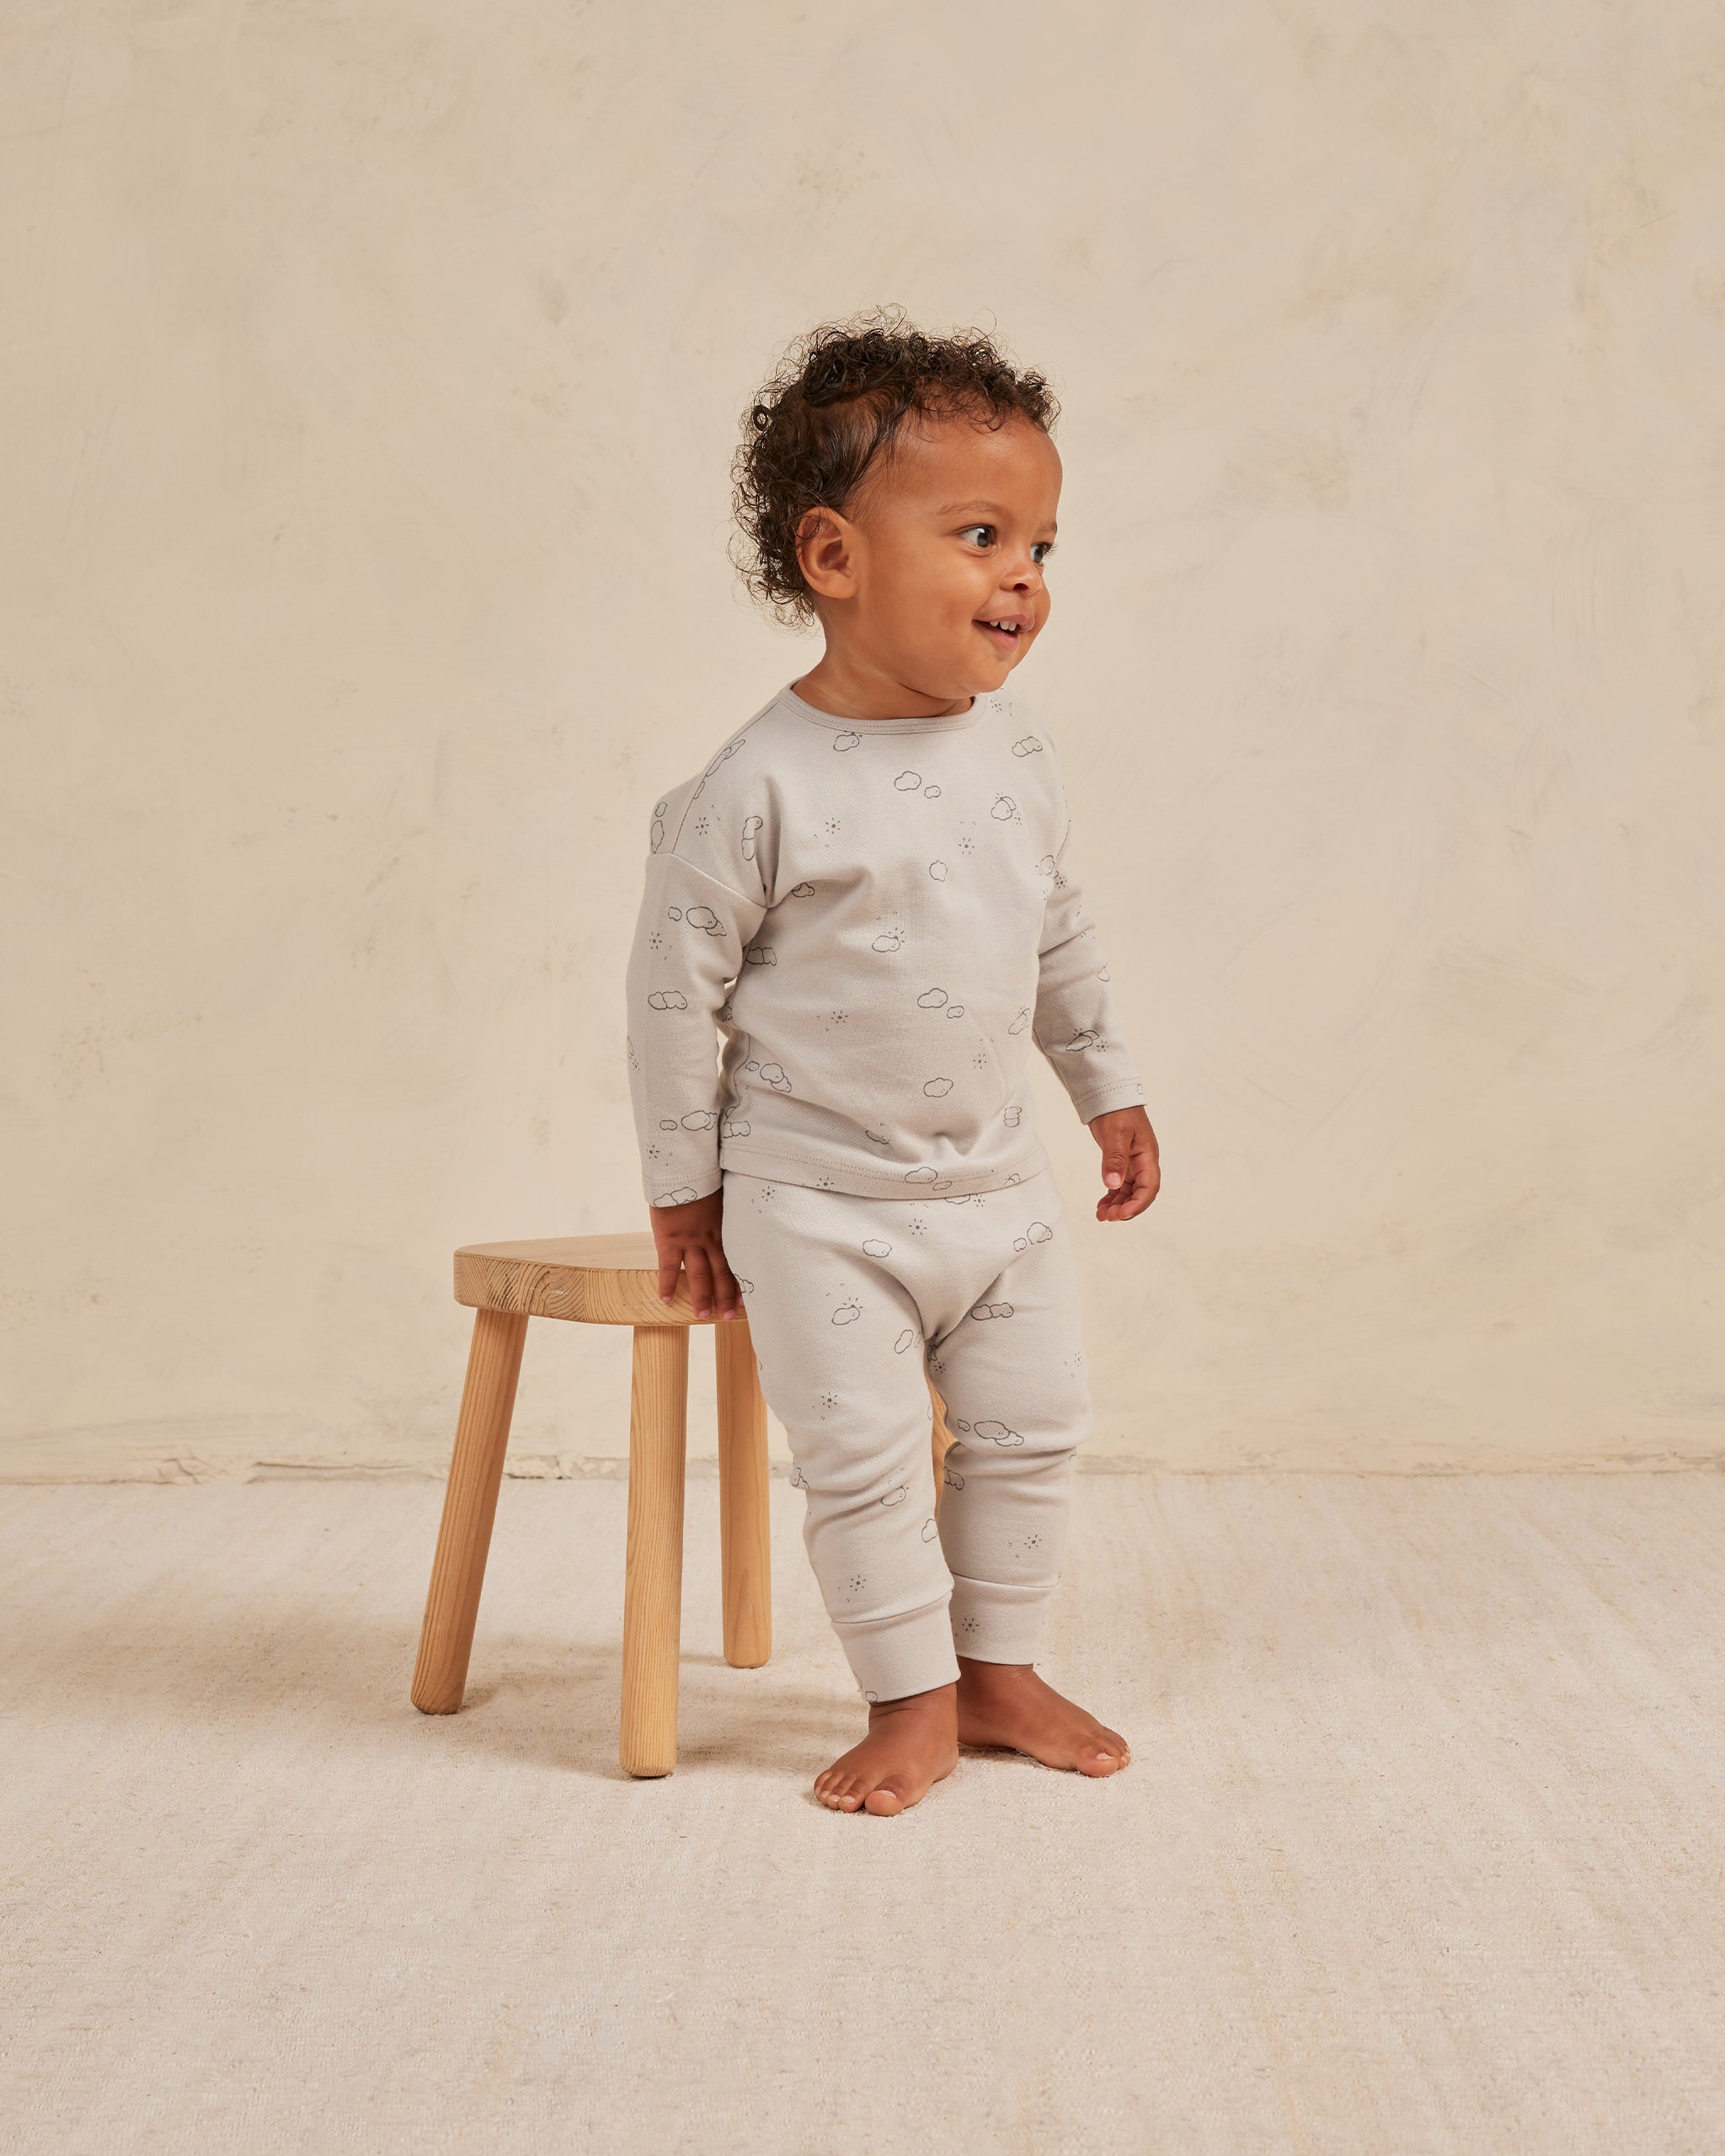 Long Sleeve Tee || Sunny Day - Rylee + Cru | Kids Clothes | Trendy Baby Clothes | Modern Infant Outfits |